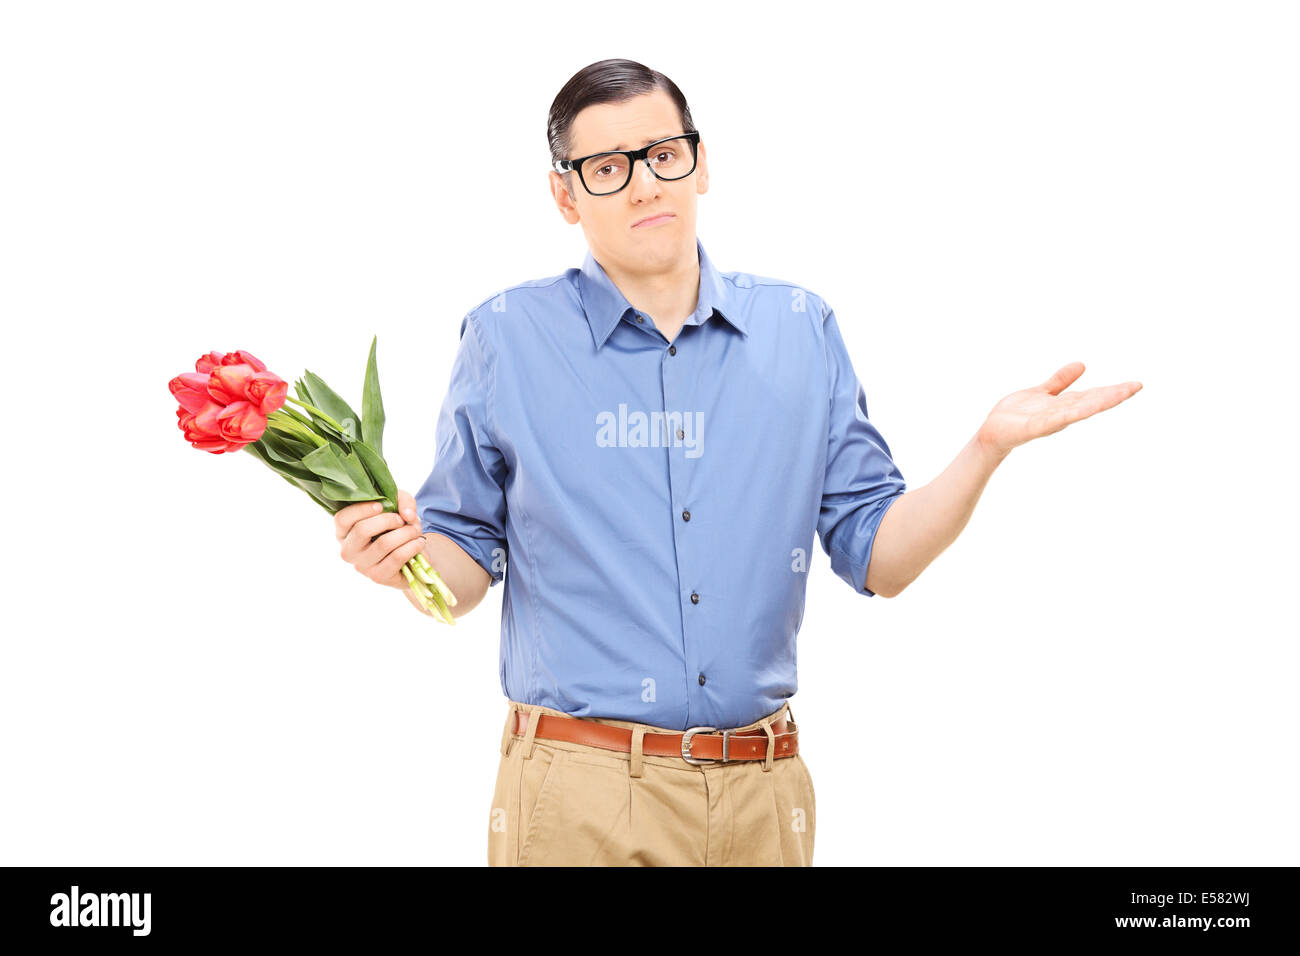 Displeased young man holding a bunch of flowers Stock Photo